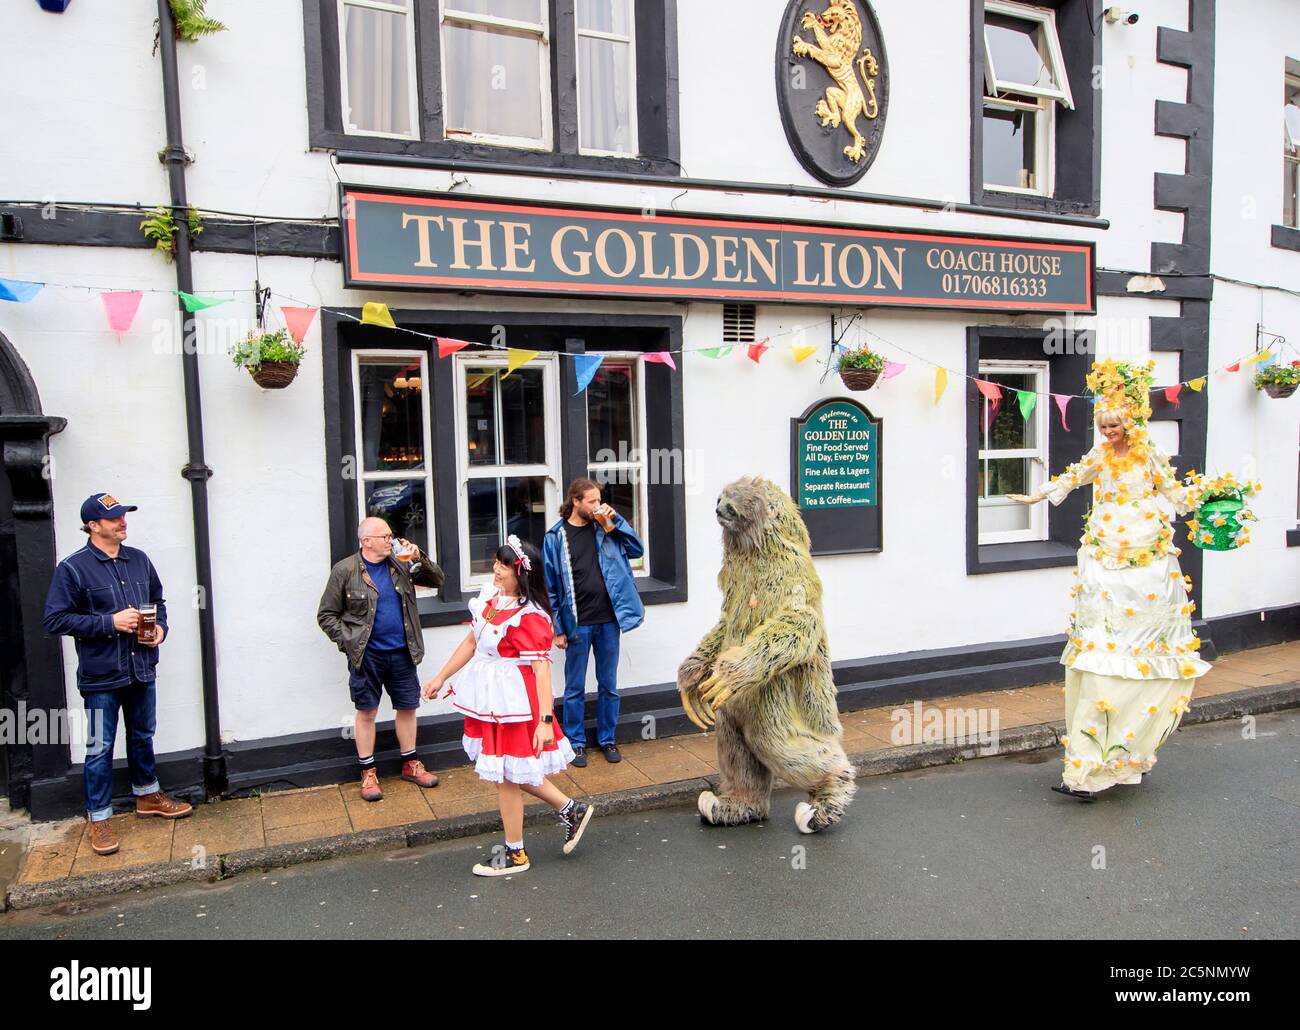 Street artists perform for costumers outside the Golden Lion pub in Todmorden, West Yorkshire, as it reopens following the easing of coronavirus lockdown restrictions across England. Stock Photo